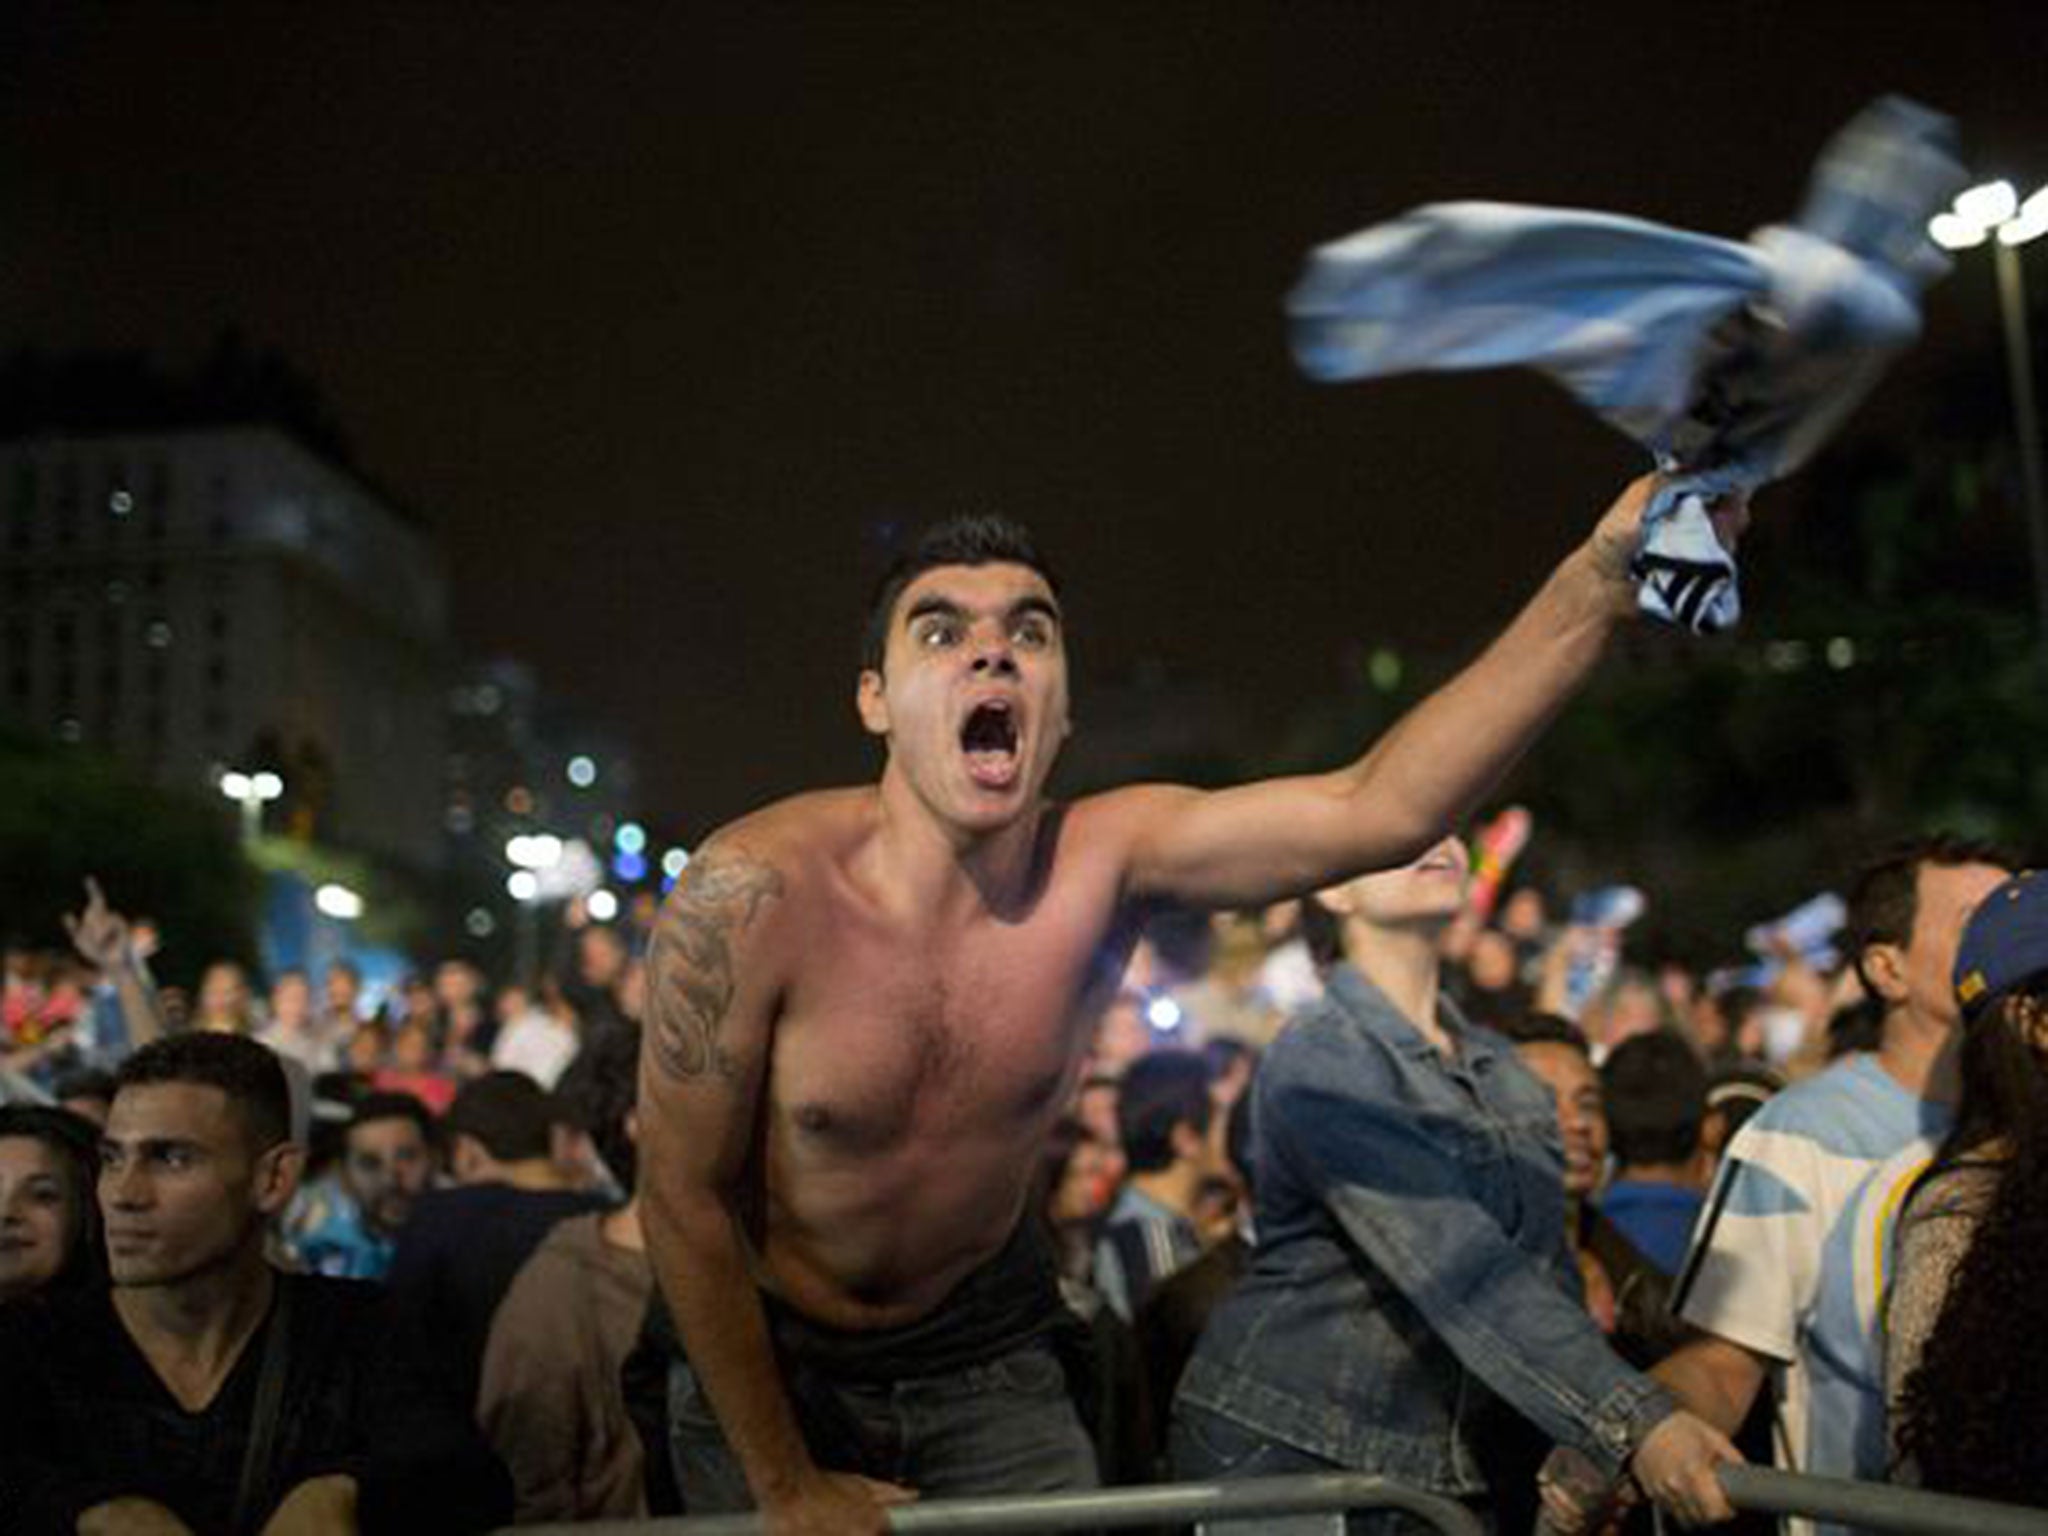 There were mass celebrations across Argentina as the country's national team reached their first World Cup final for 24 years